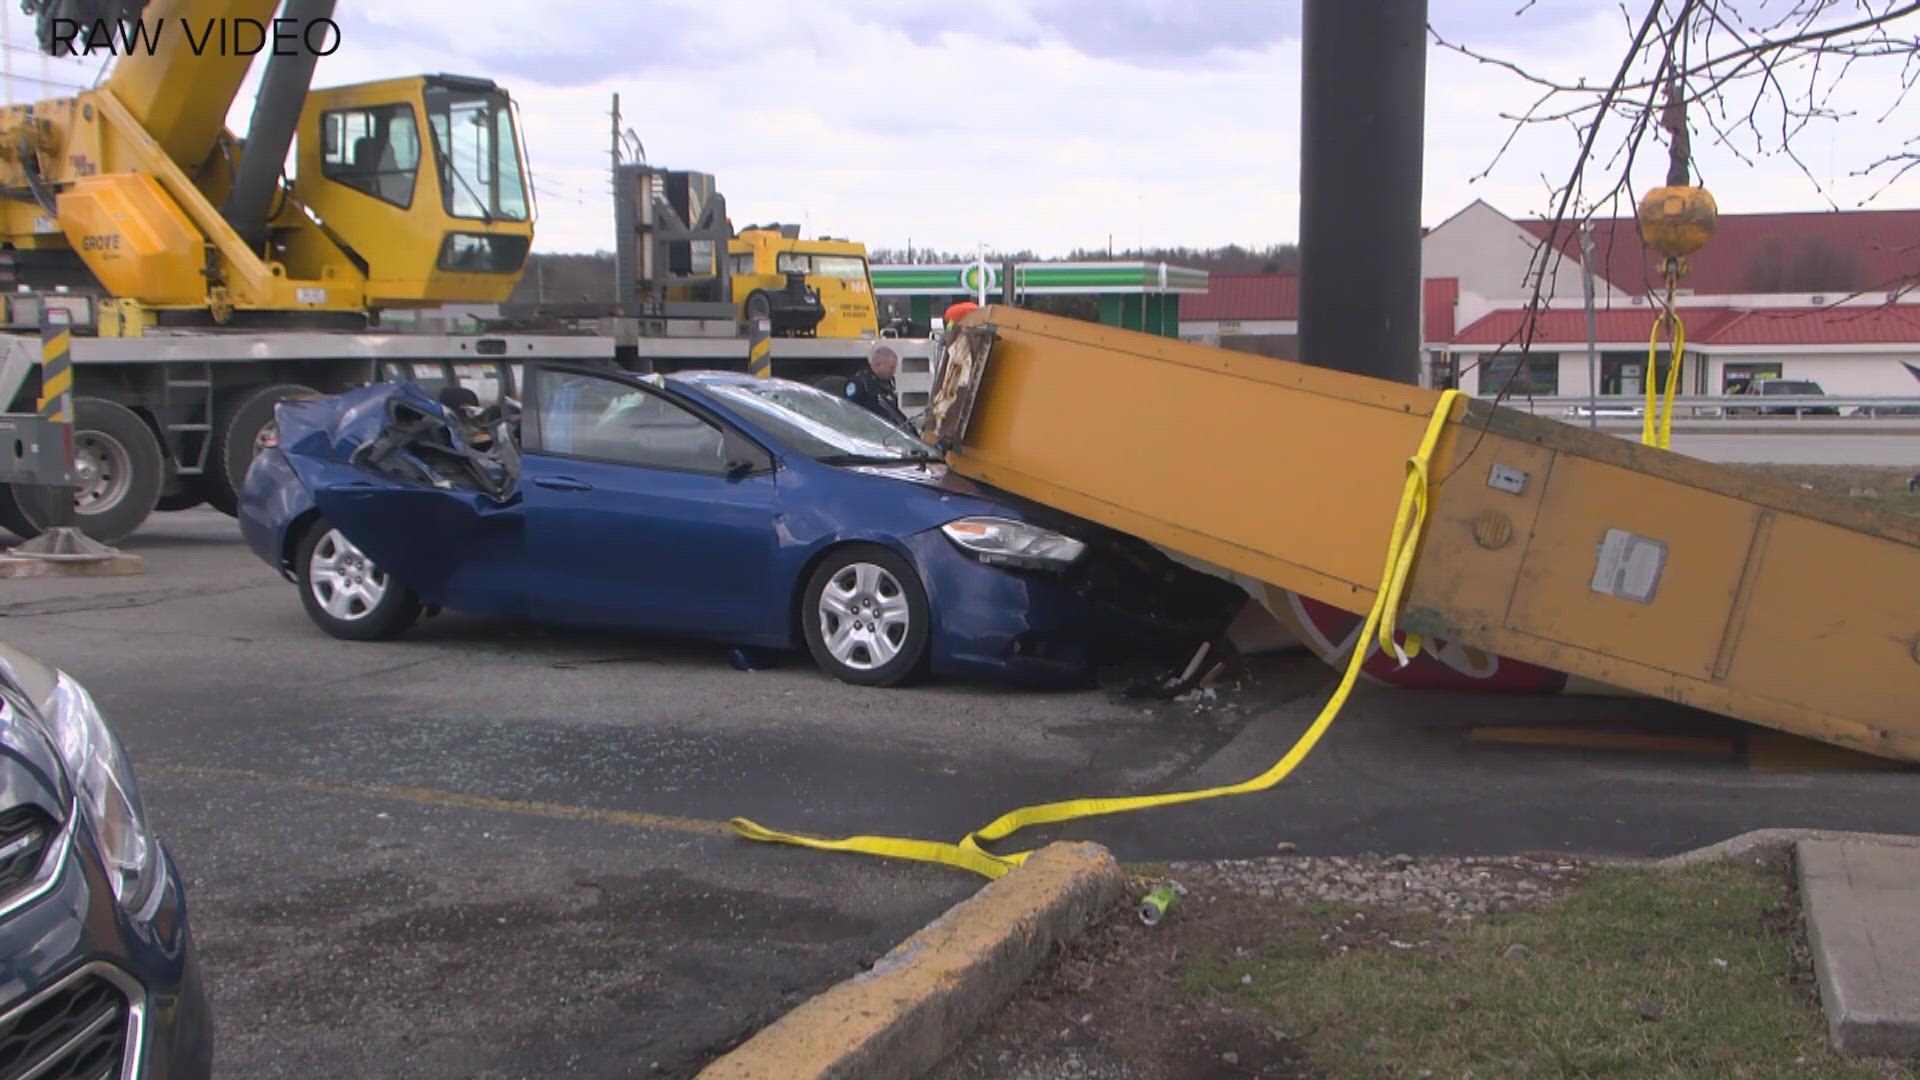 'She was one of a kind': 72-year-old Kentucky woman dead after Denny's sign crushes car